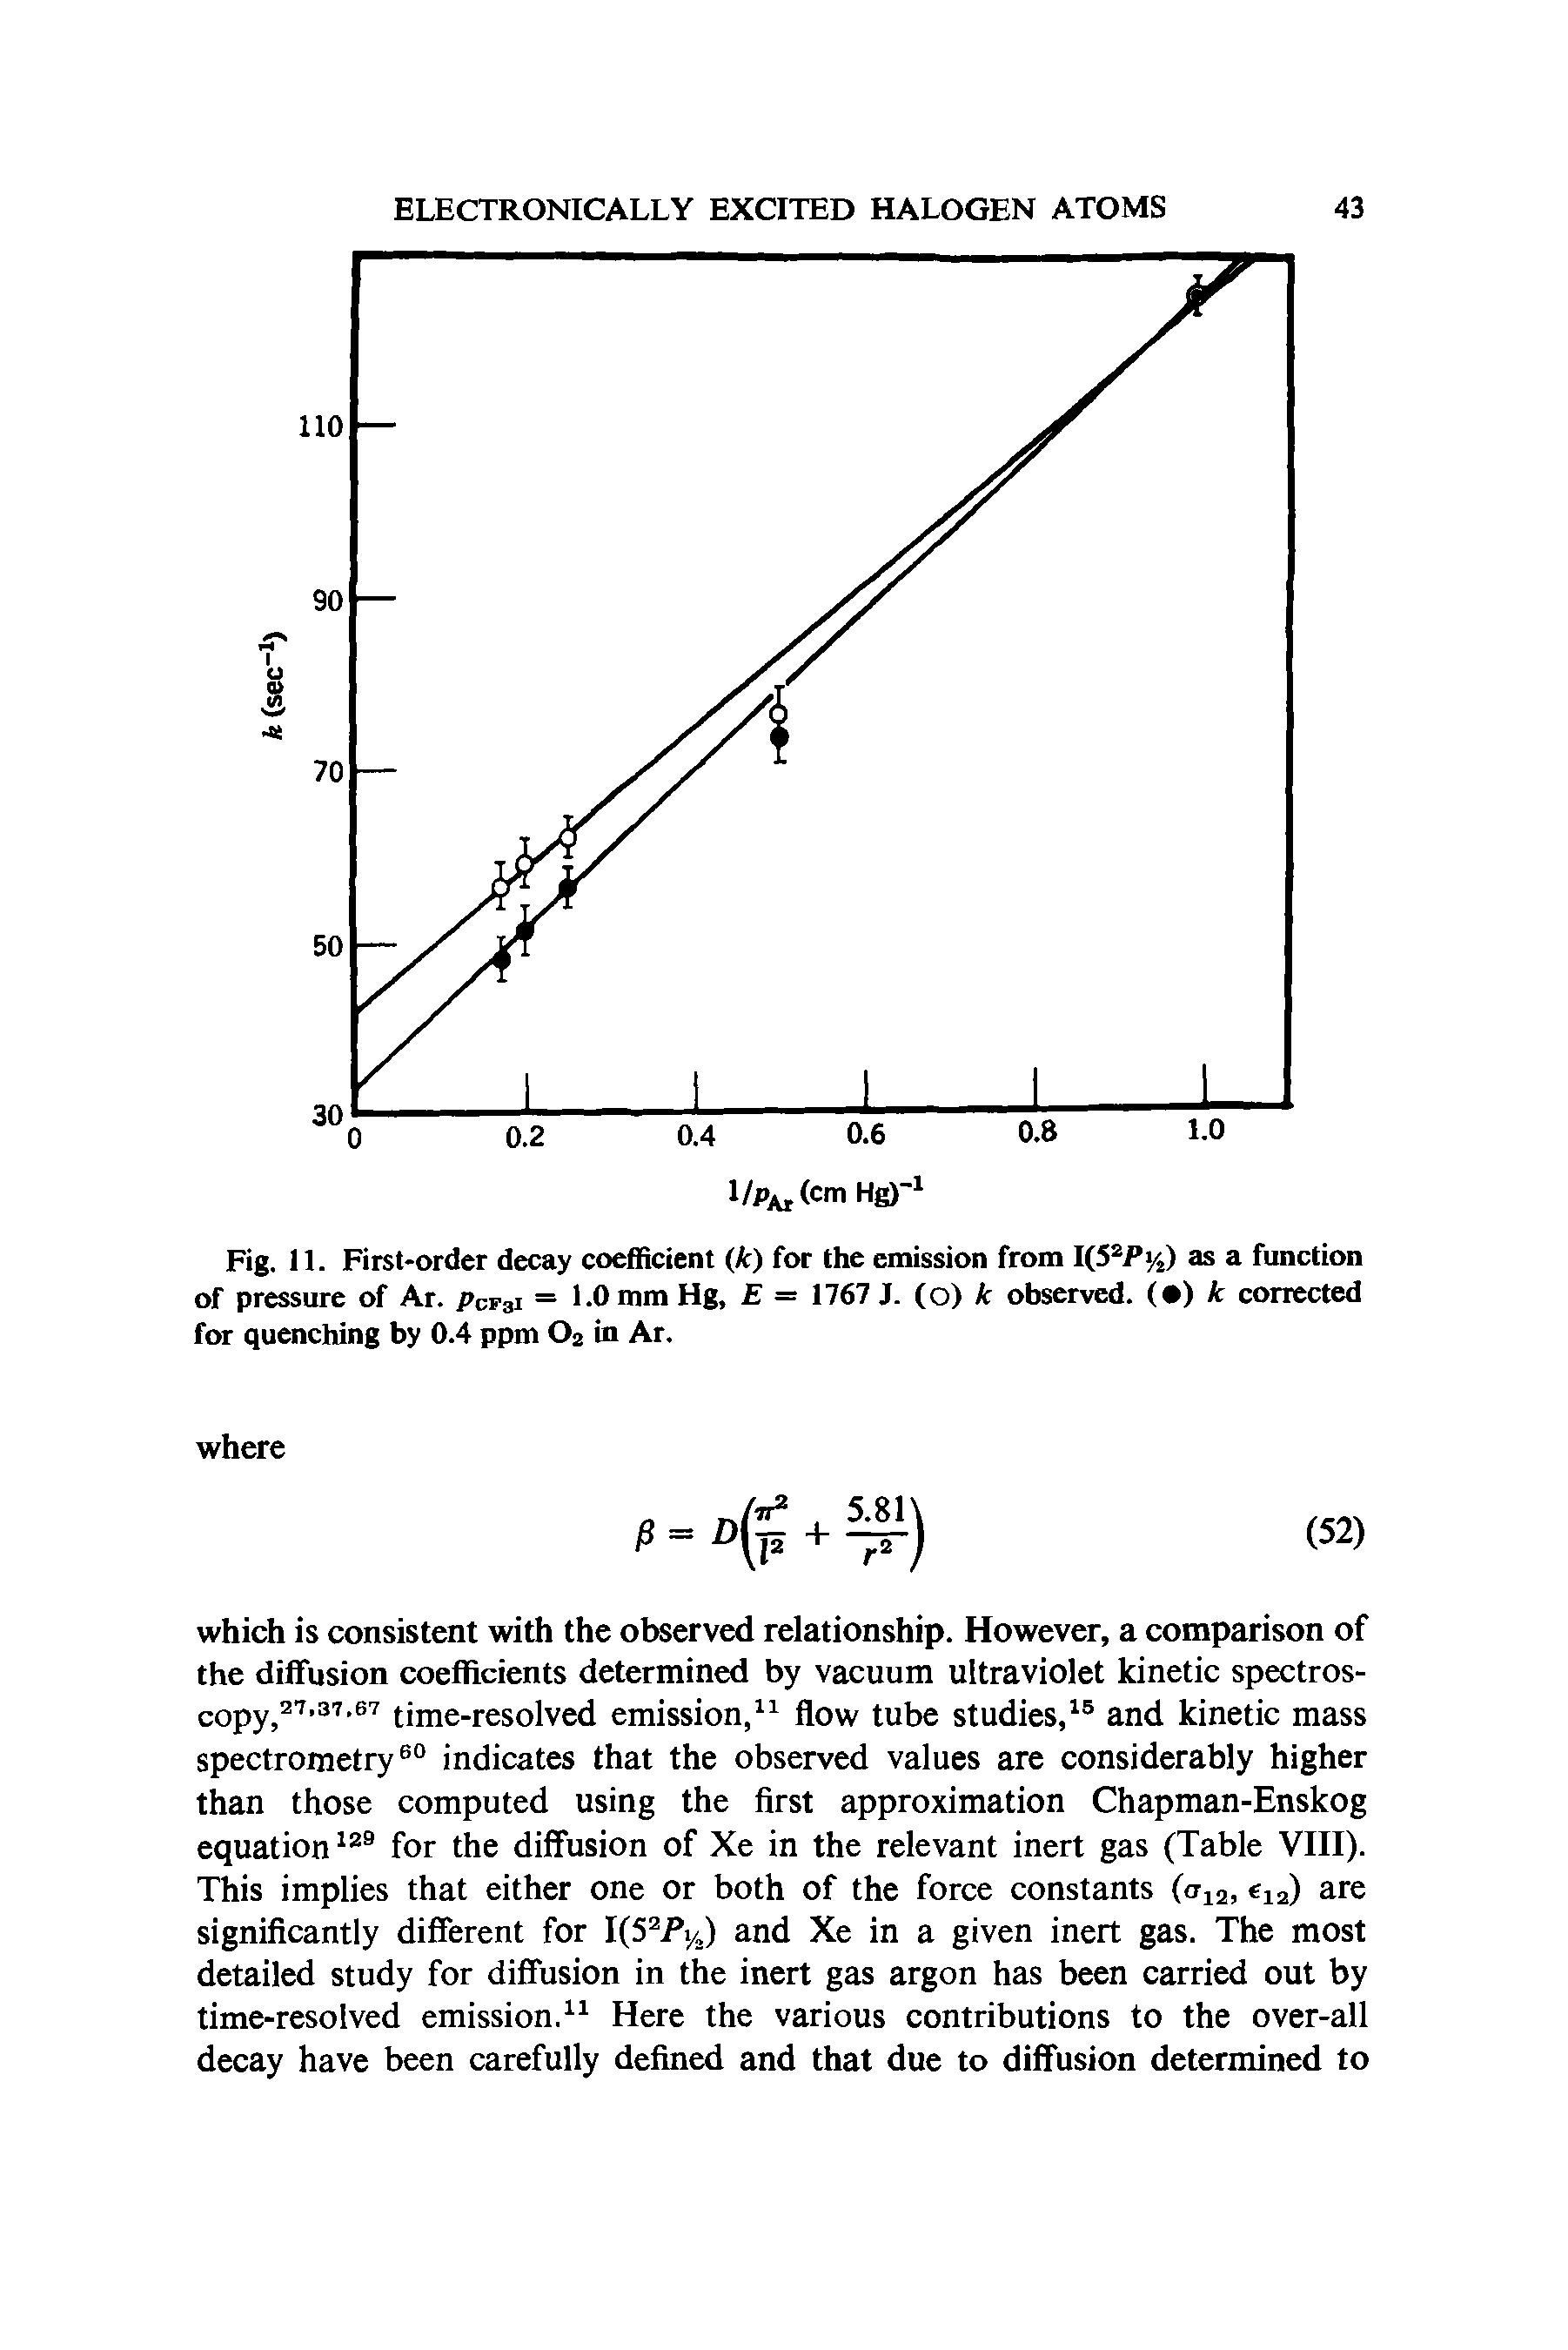 Fig. 11. First-order decay coefficient (k) for the emission from I(52Py2) as a function of pressure of Ar. pcf3i = 1.0 mm Hg, E = 1767 J. (o) k observed. ( ) k corrected for quenching by 0.4 ppm 02 in Ar.